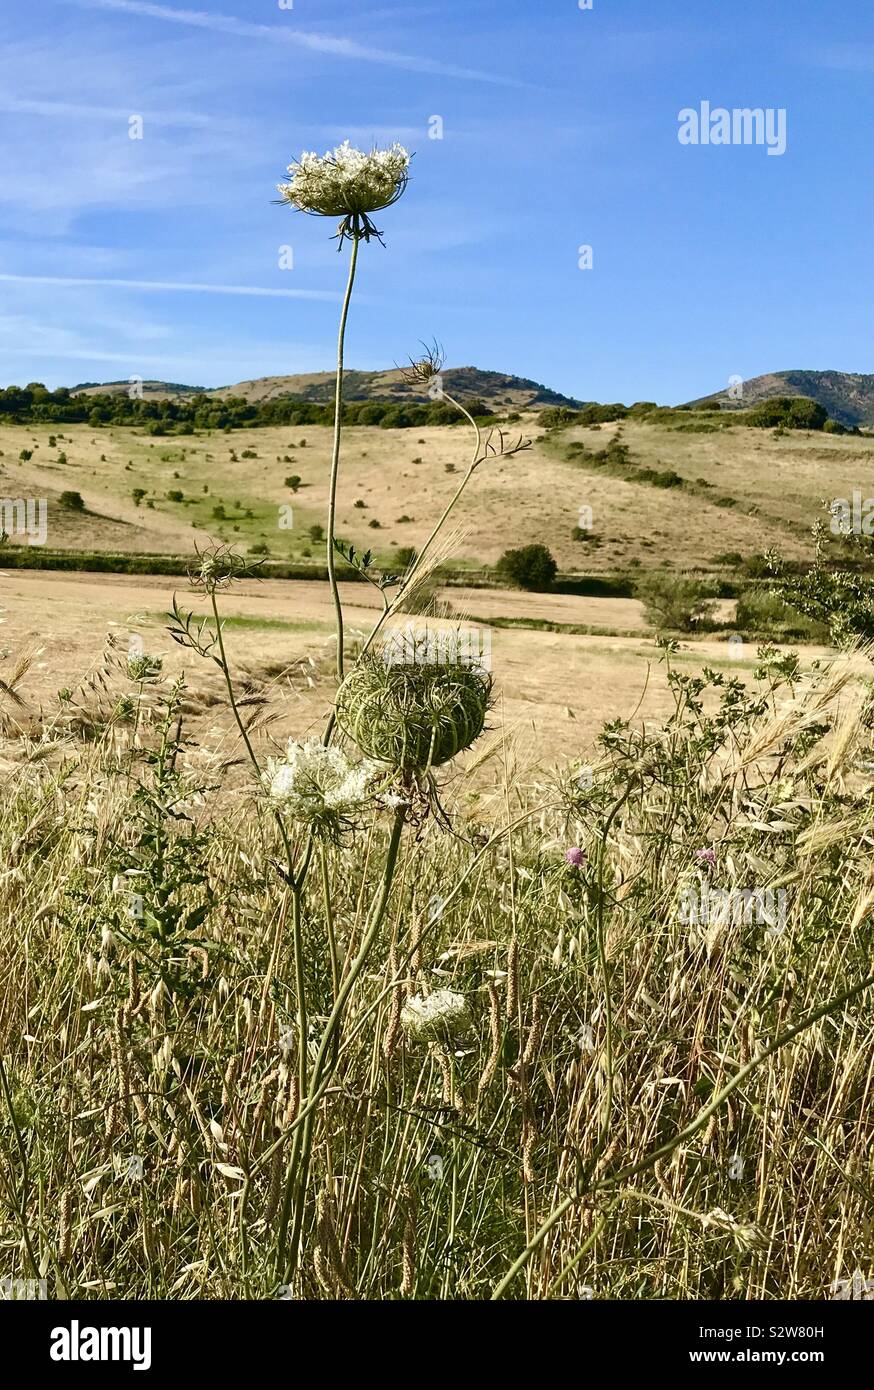 Wild carrot, Queen Anne’s Lace in Sardinian summer landscape Stock Photo